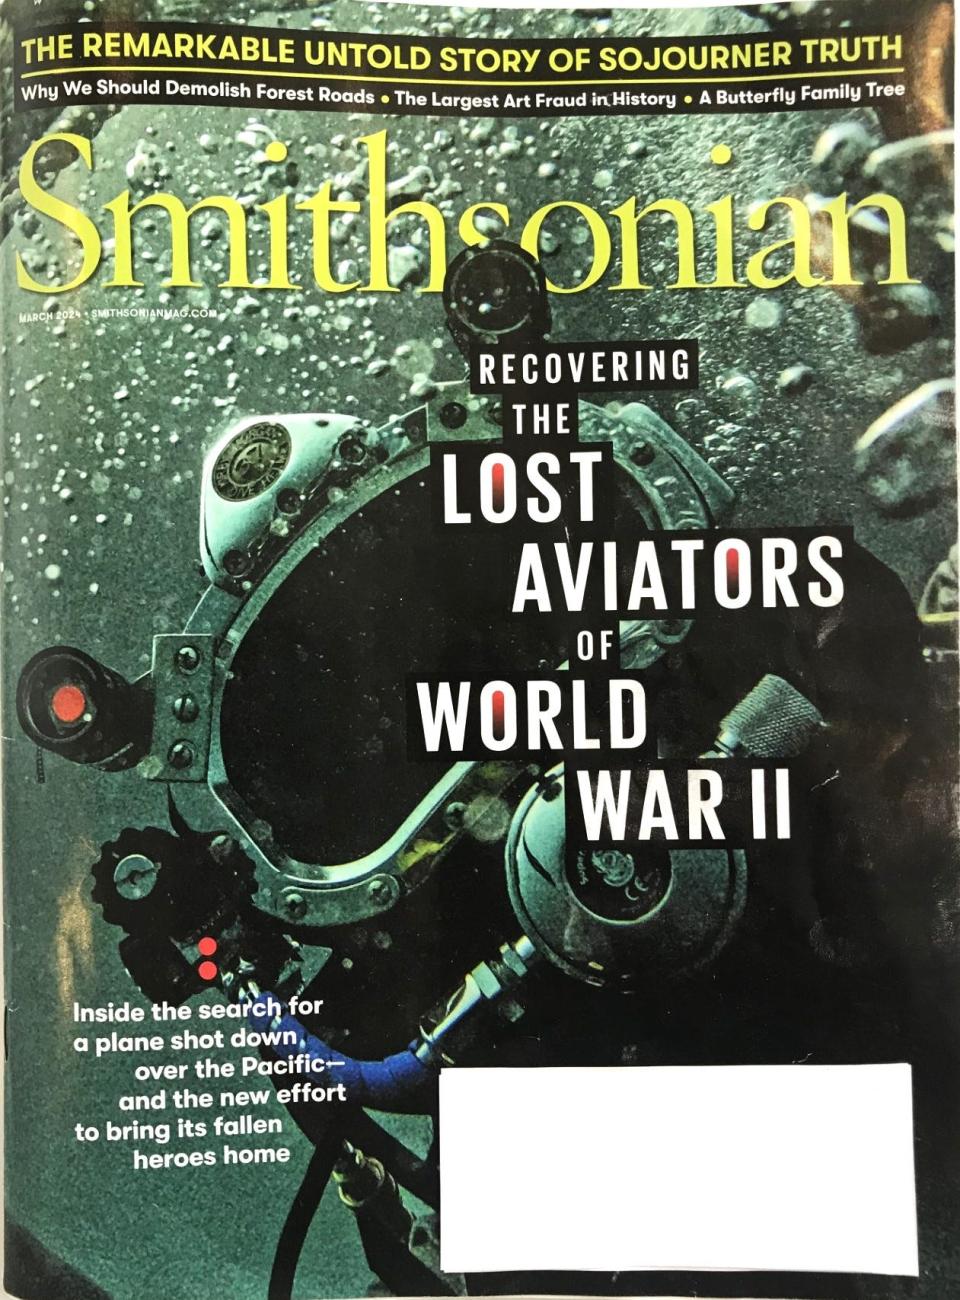 UGA professor Stephen Mihm's article was the cover story for the March issue of Smithsonian.